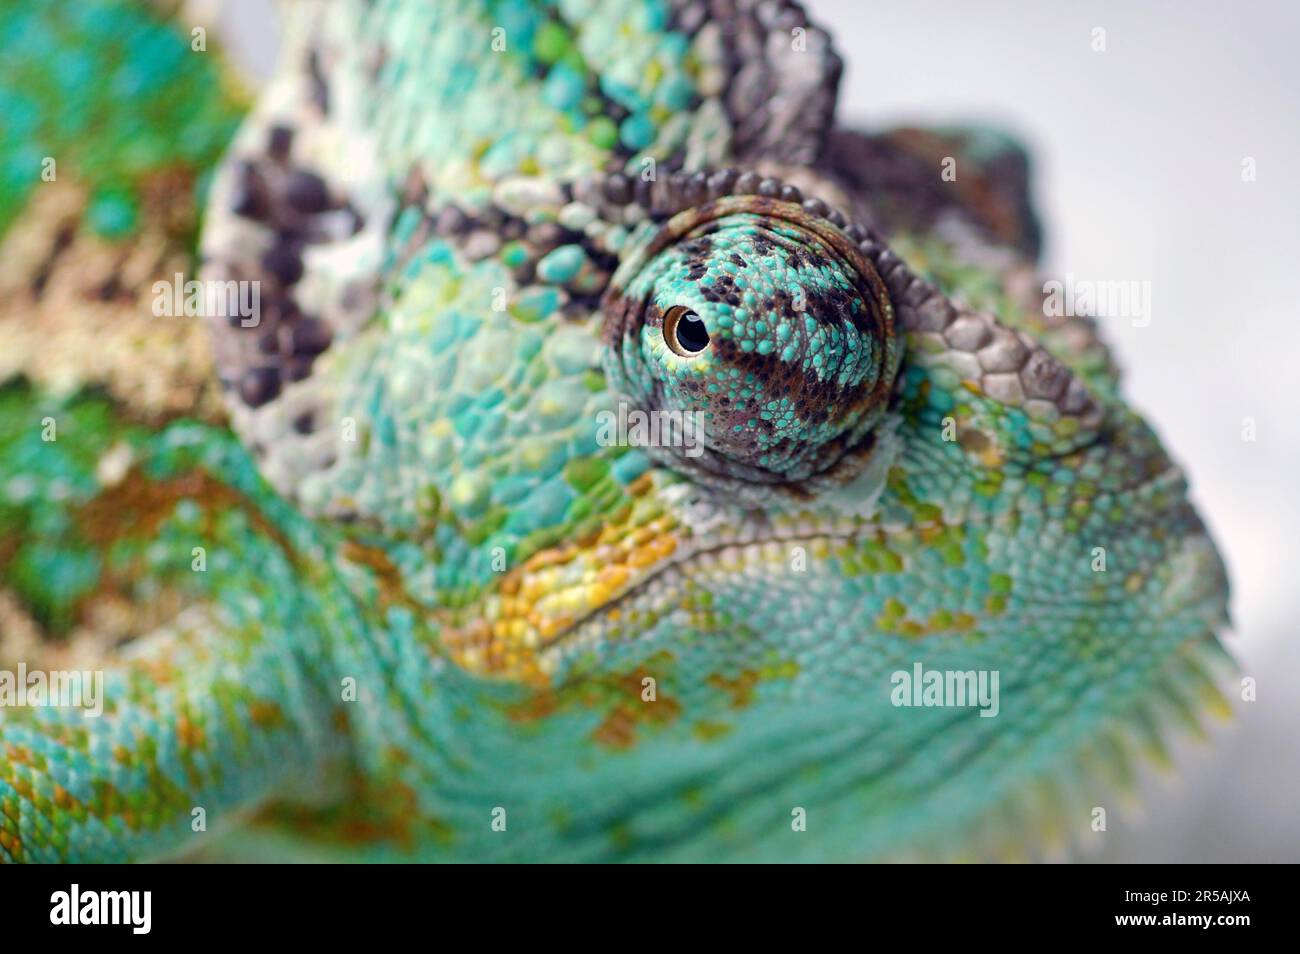 Colourful blue and green exotic pet male chameleon with macro focus on eye looking to the side Stock Photo